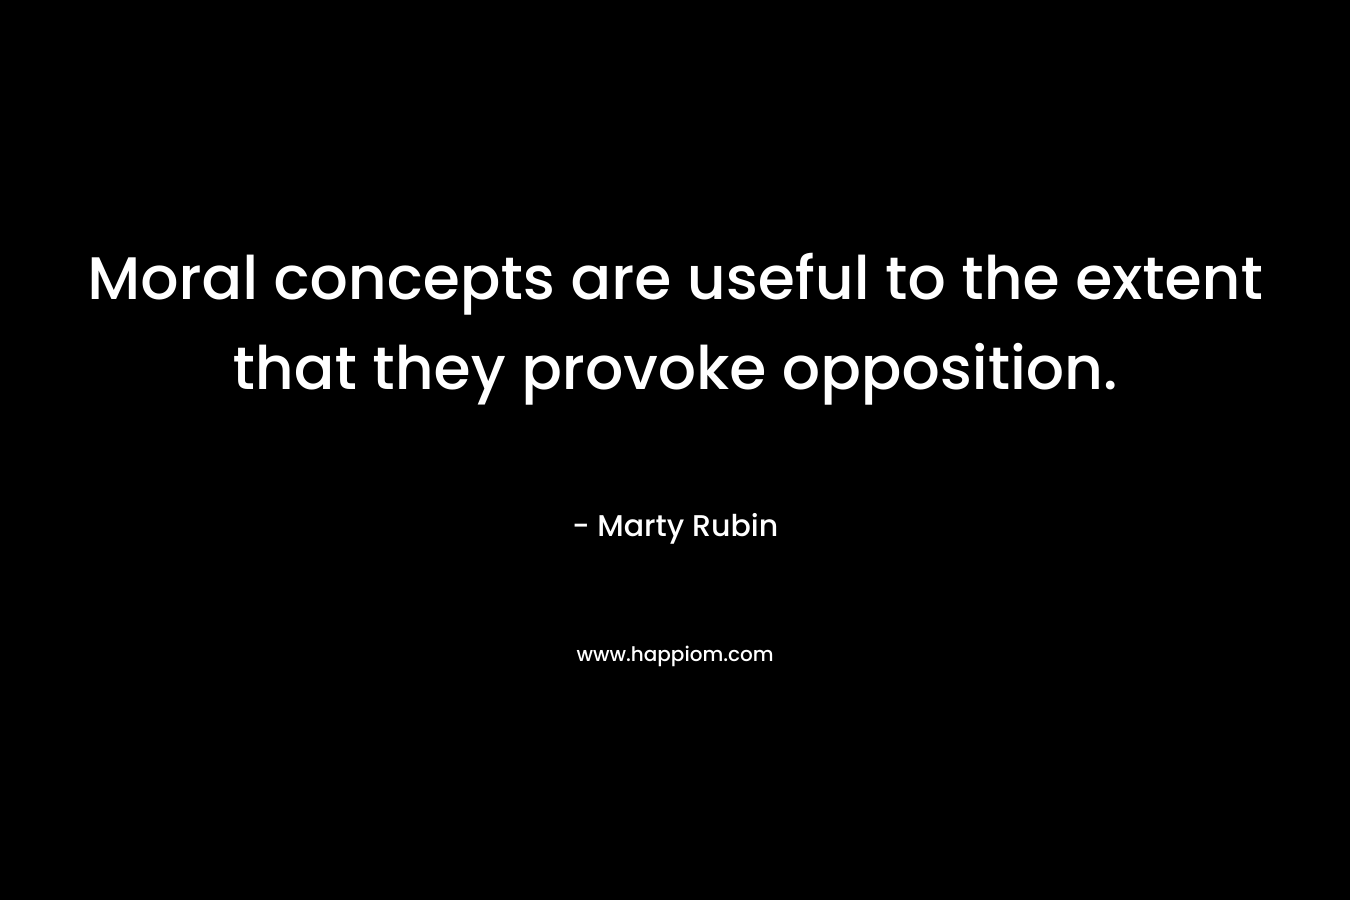 Moral concepts are useful to the extent that they provoke opposition.